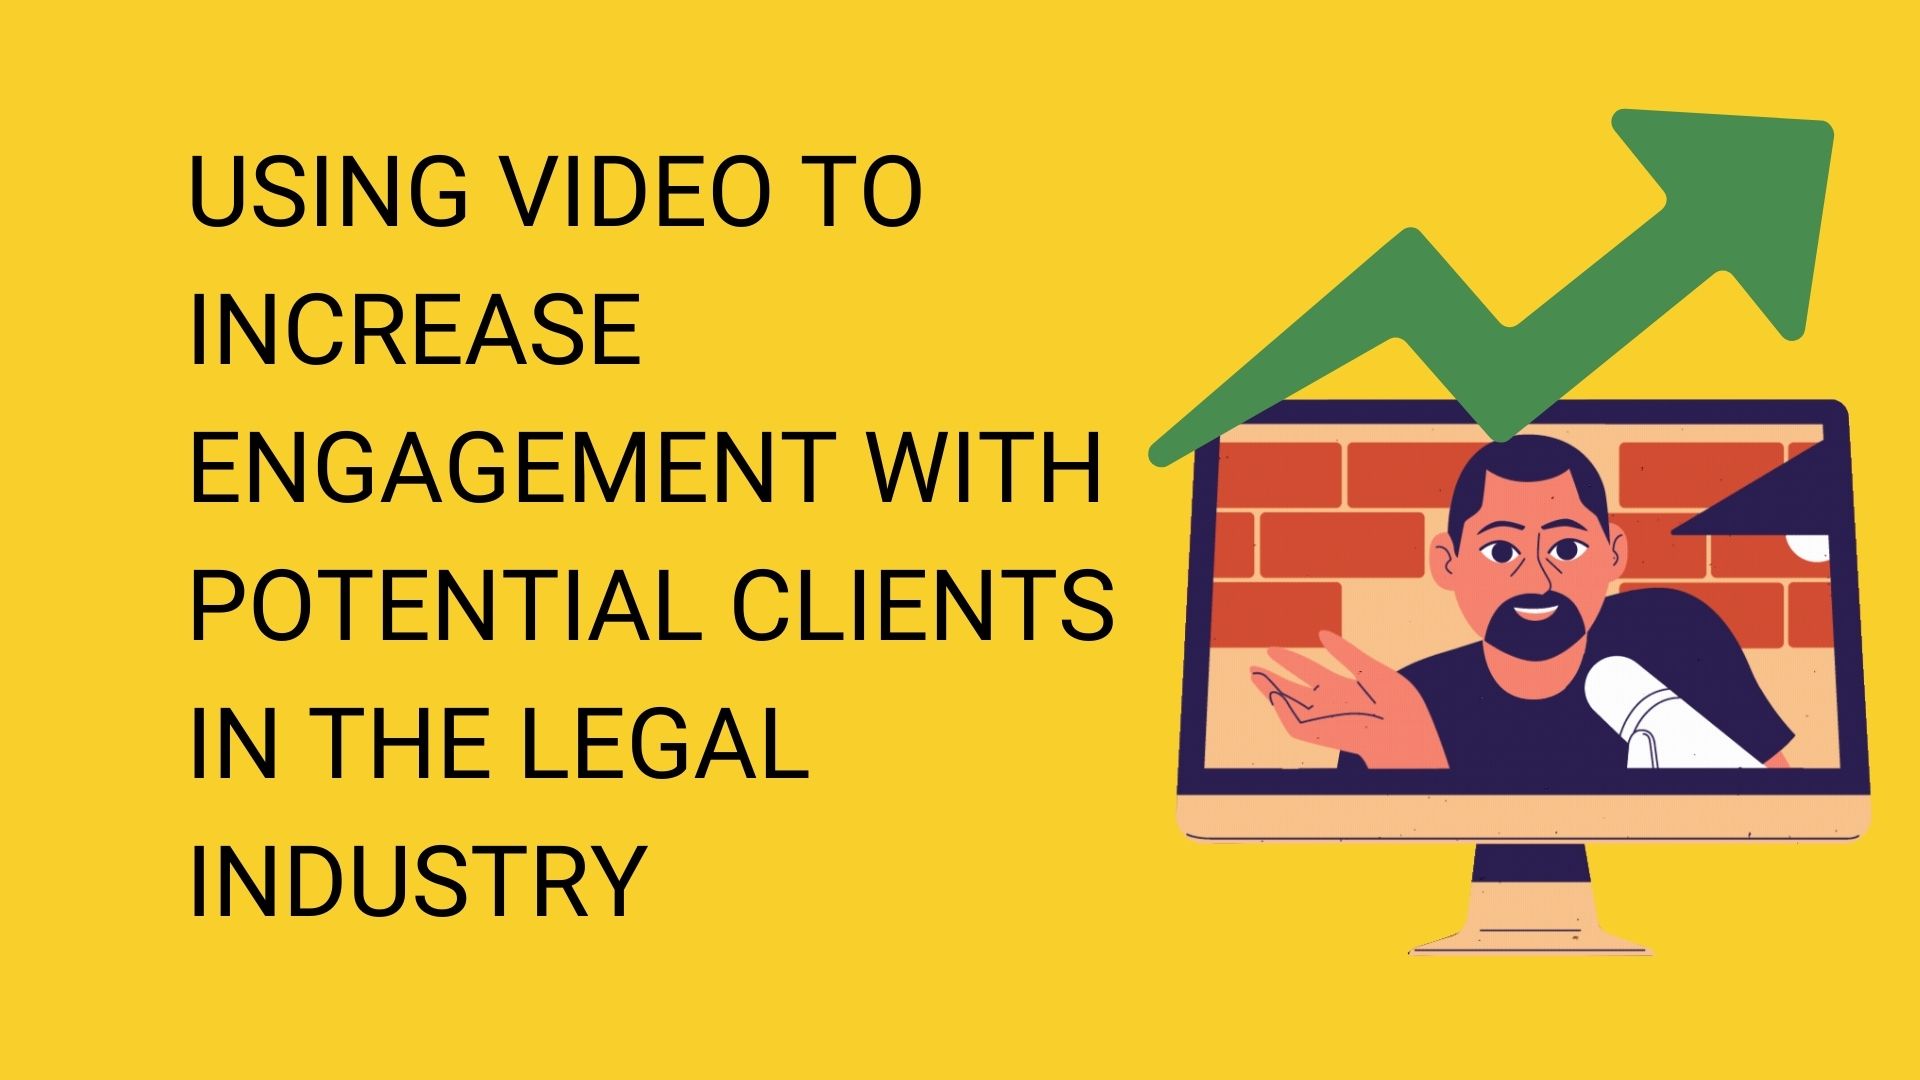 Using Video to Increase Engagement with Potential Clients in the Legal Industry